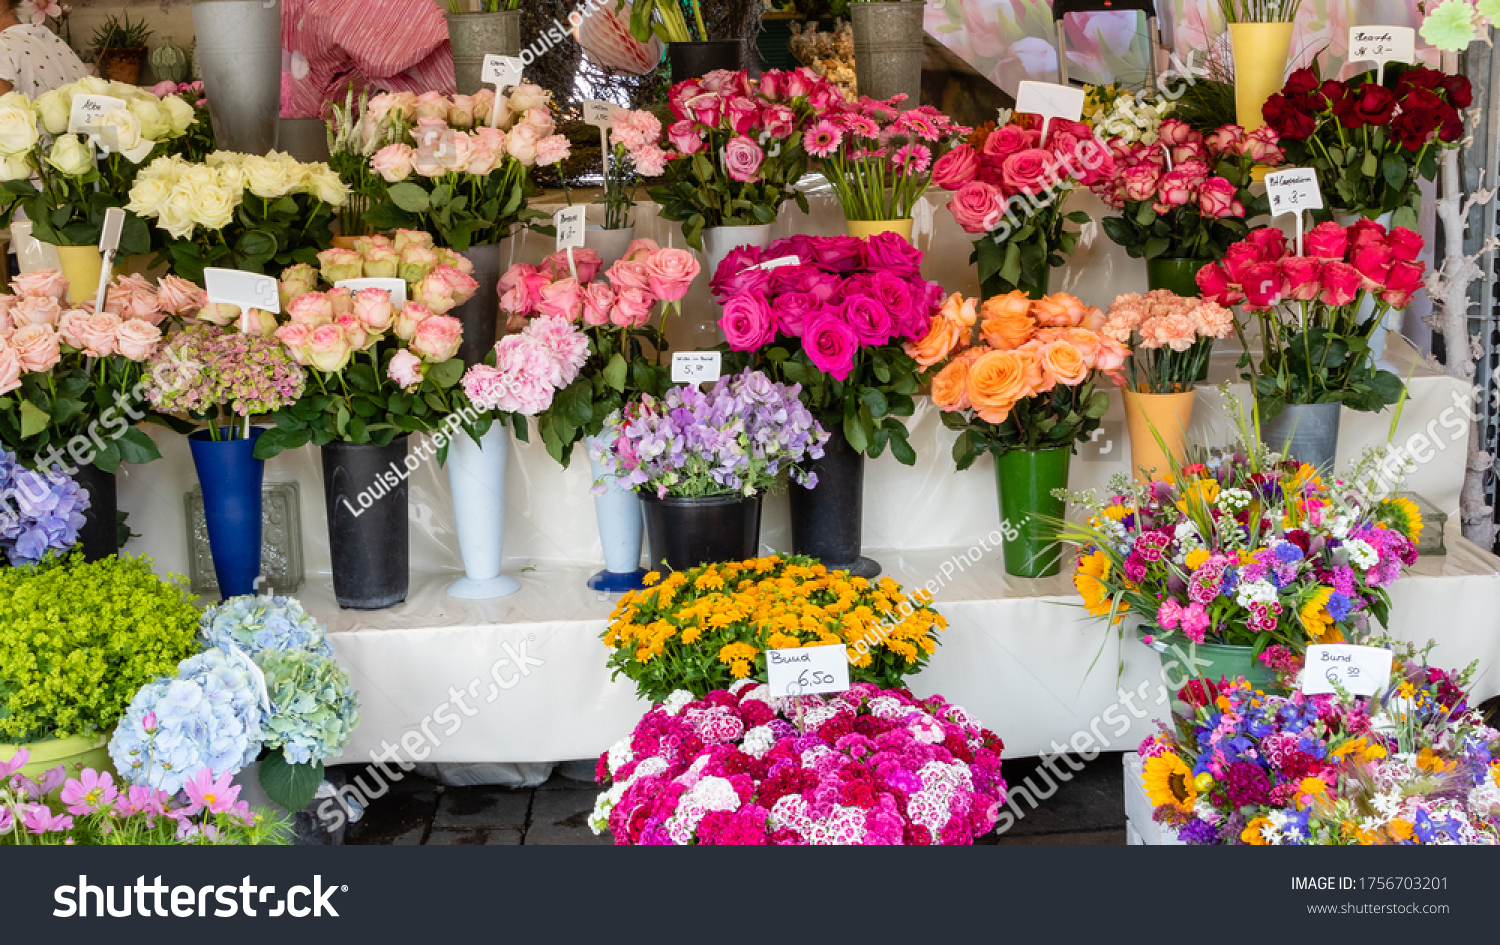 Munich, Germany - June 5, 2018: Fresh flowers on display at the victuals market in Munich, Germany #1756703201